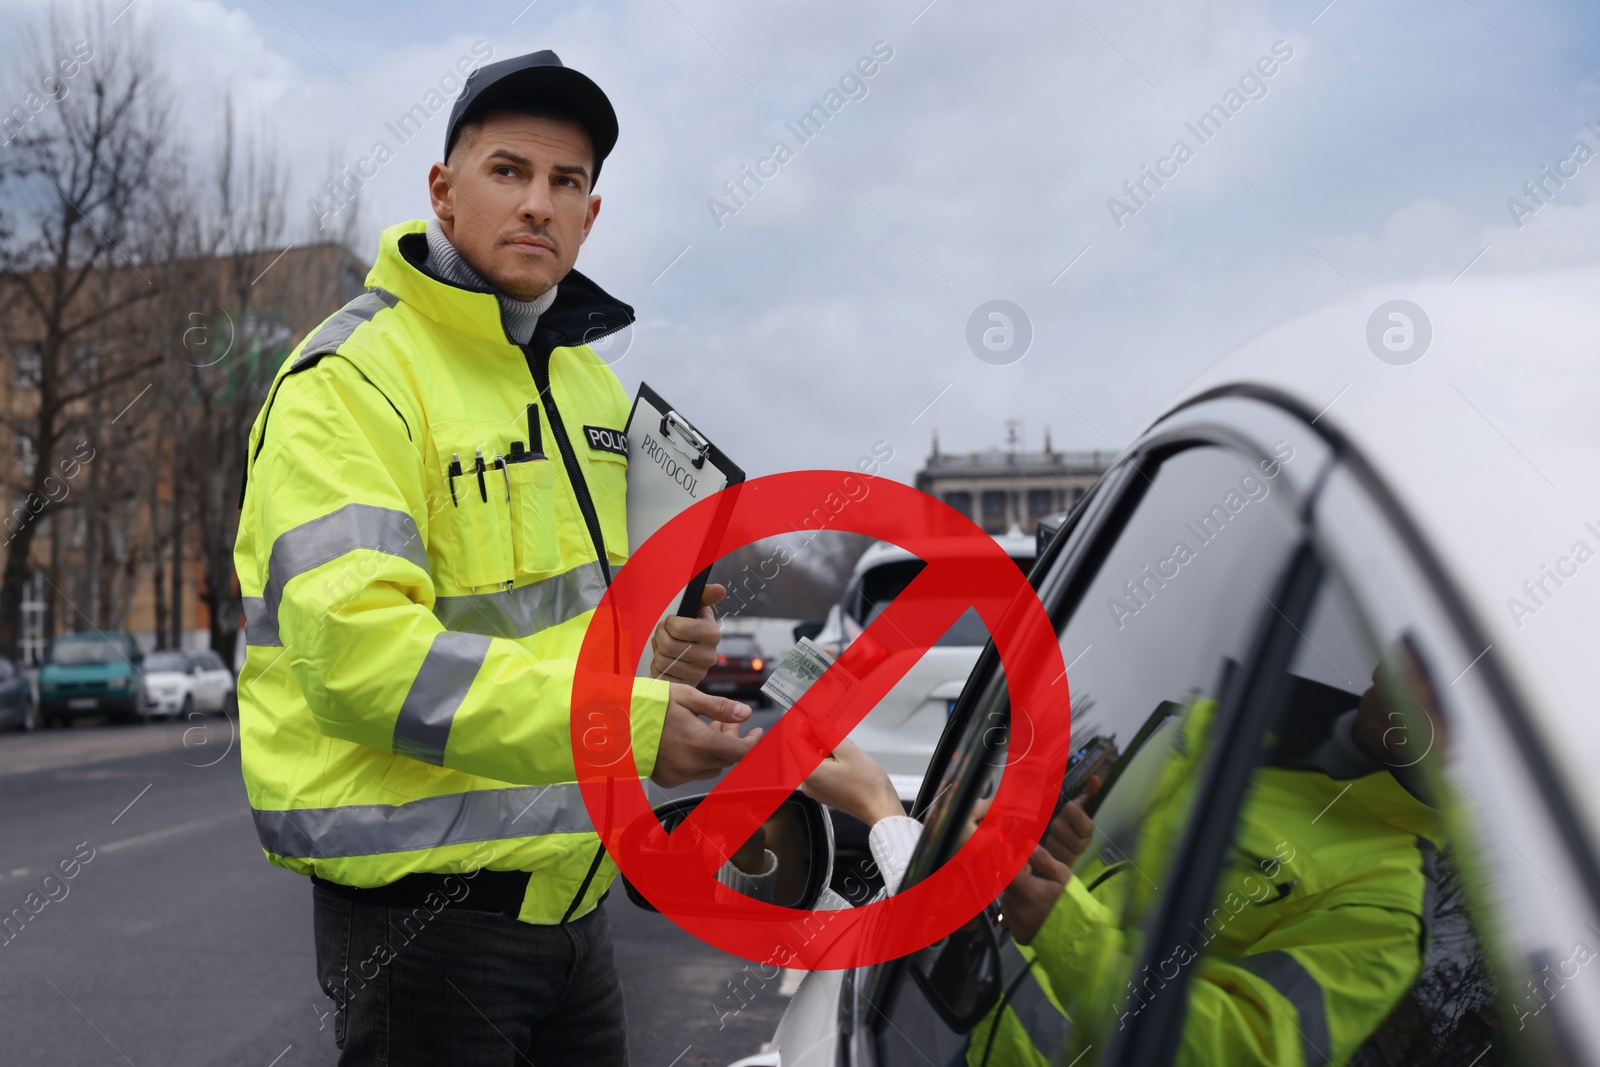 Image of Stop corruption. Illustration of red prohibition sign and woman giving bribe to police officer out of car window